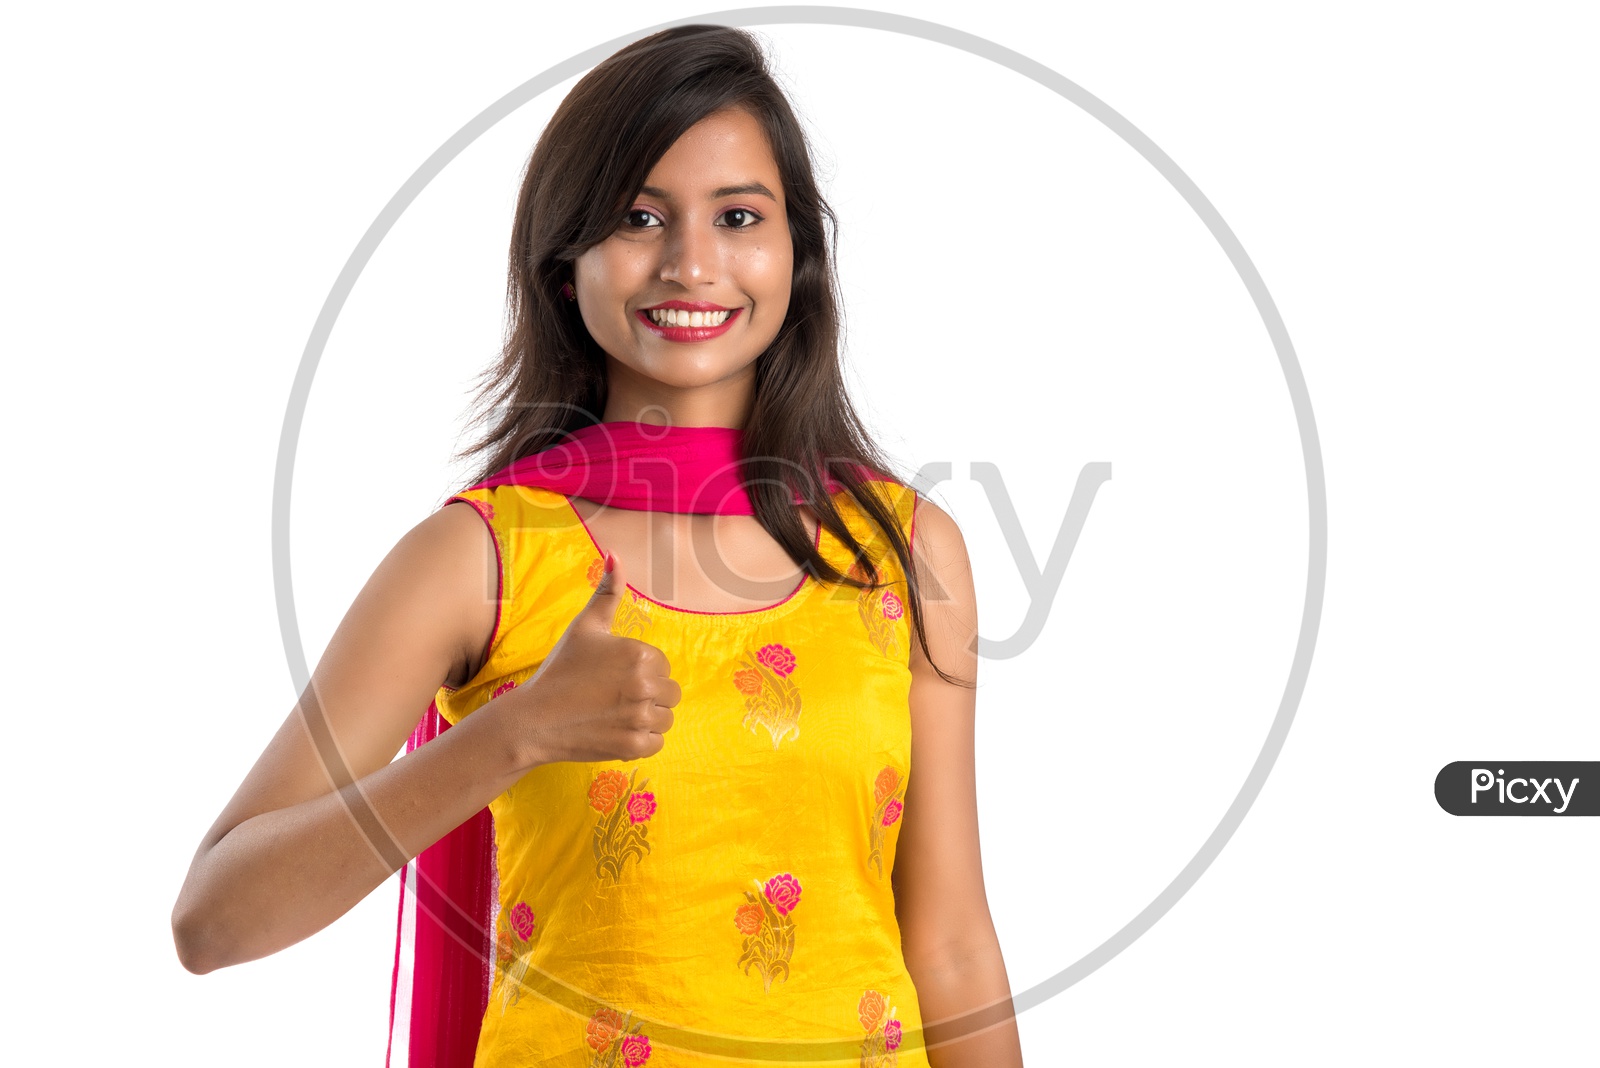 Young Indian Woman or Girl With Smiling Face And Gestures On an Isolated White Background